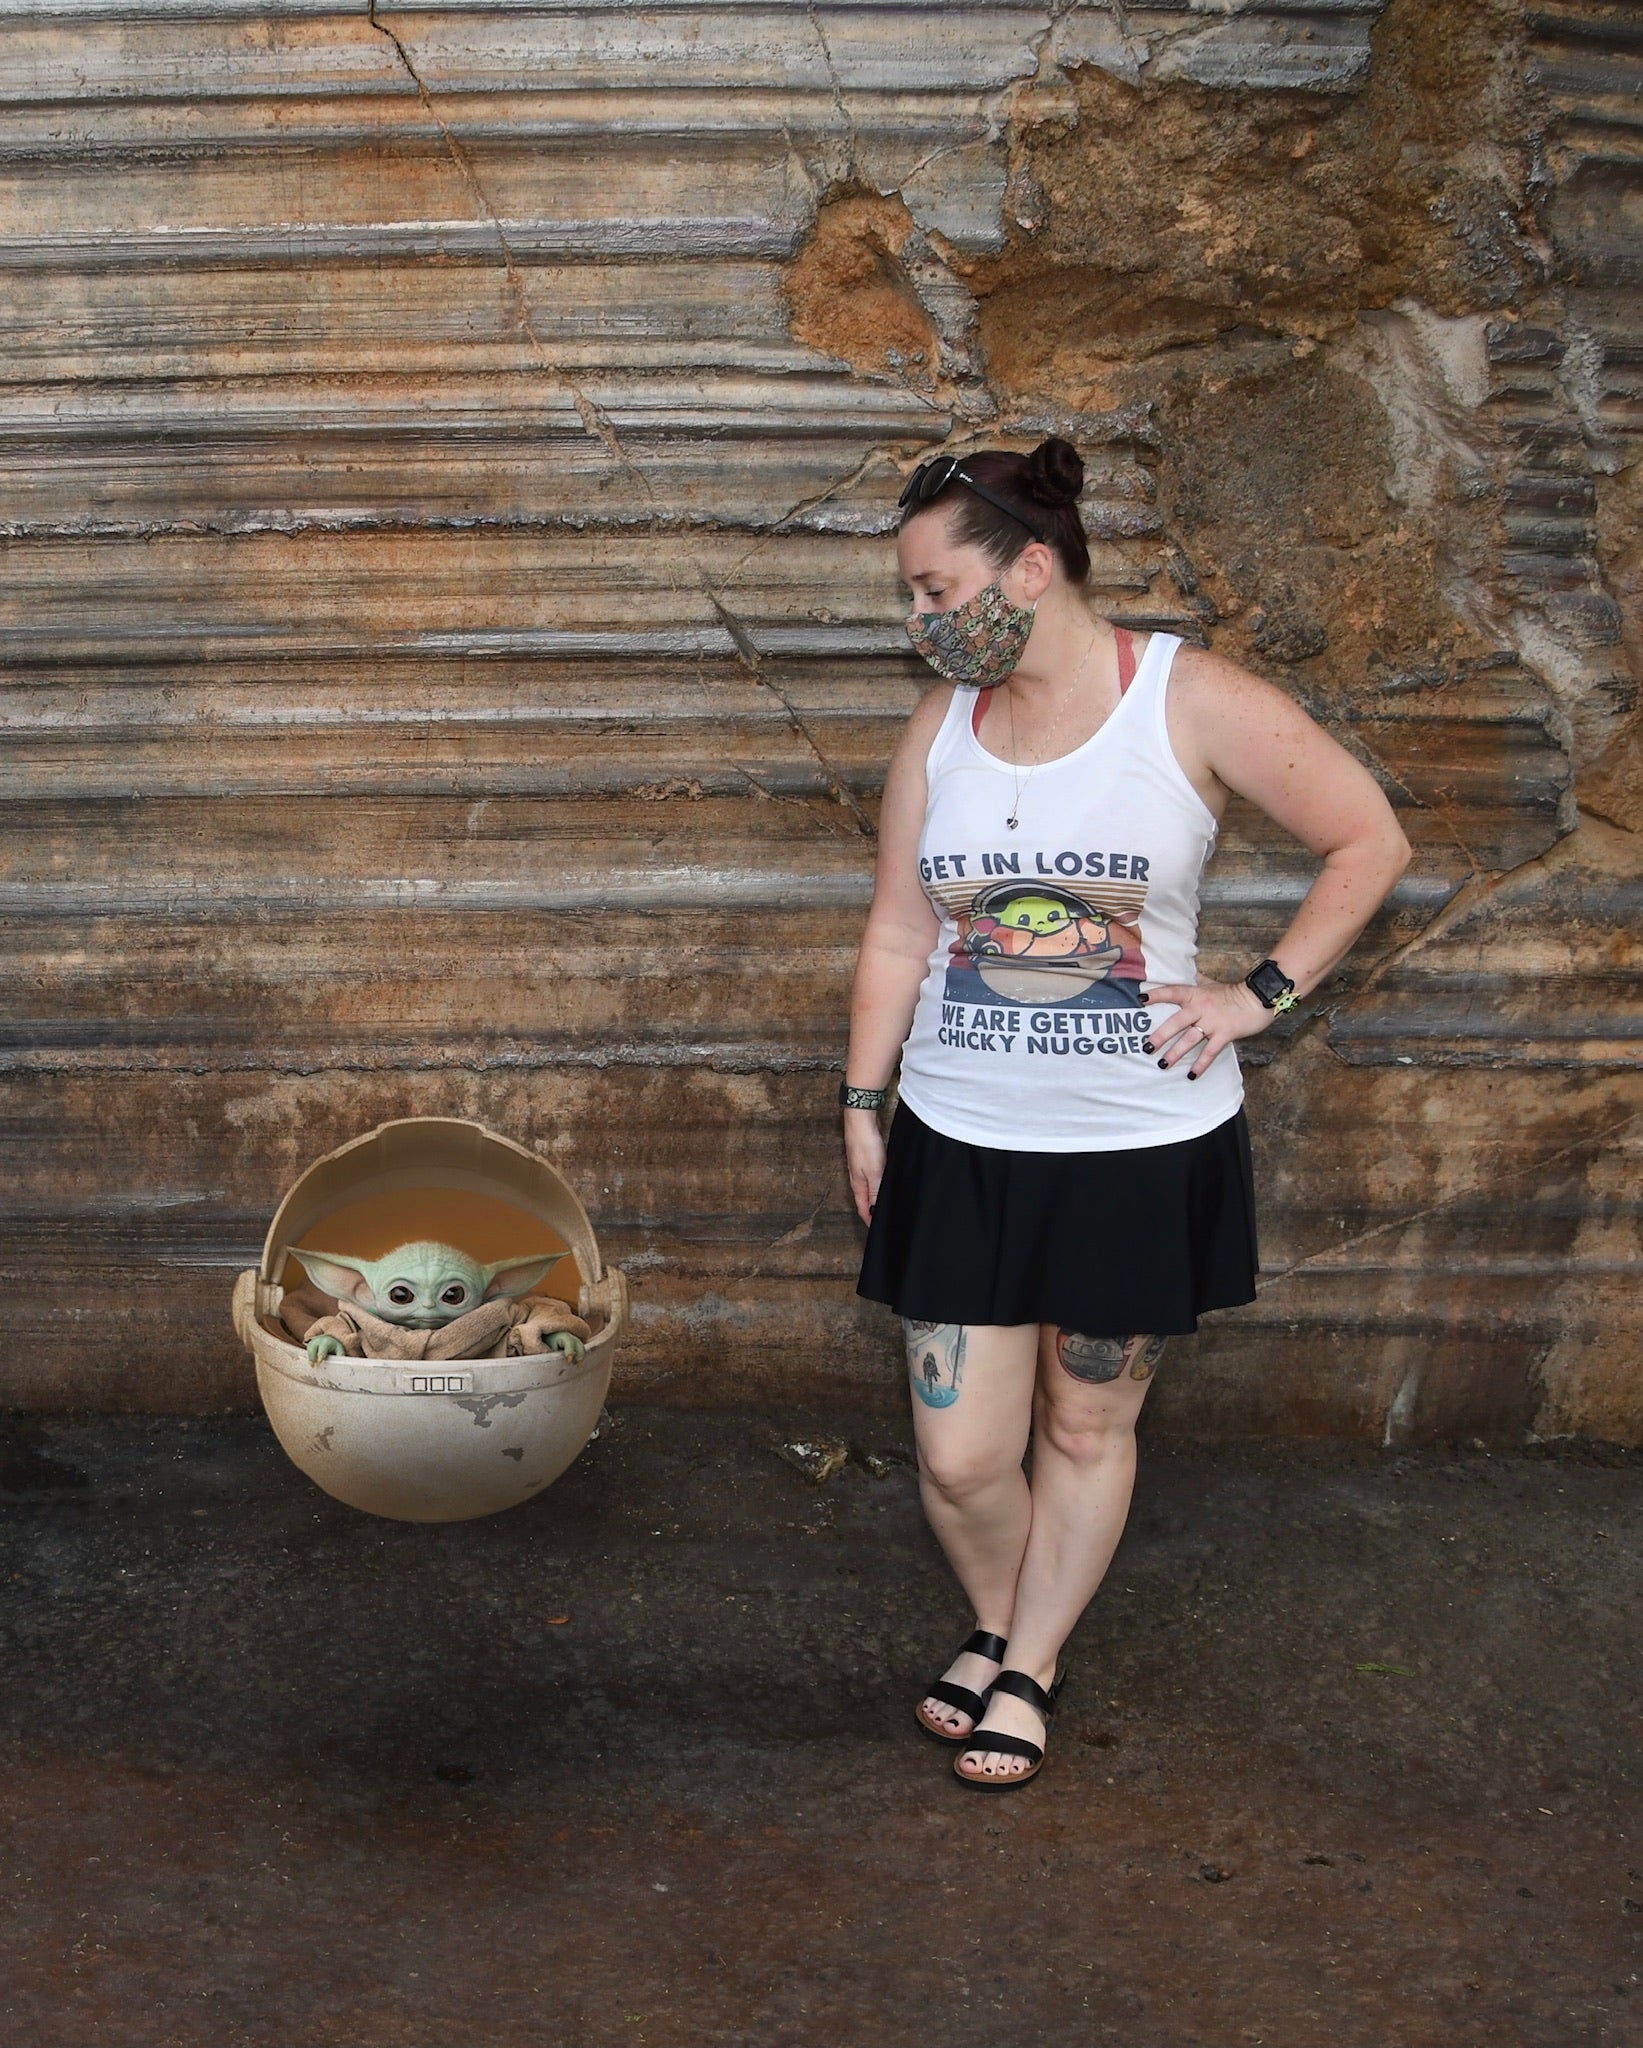 Becky posing with Baby Yoda while wearing a Bolder skirt